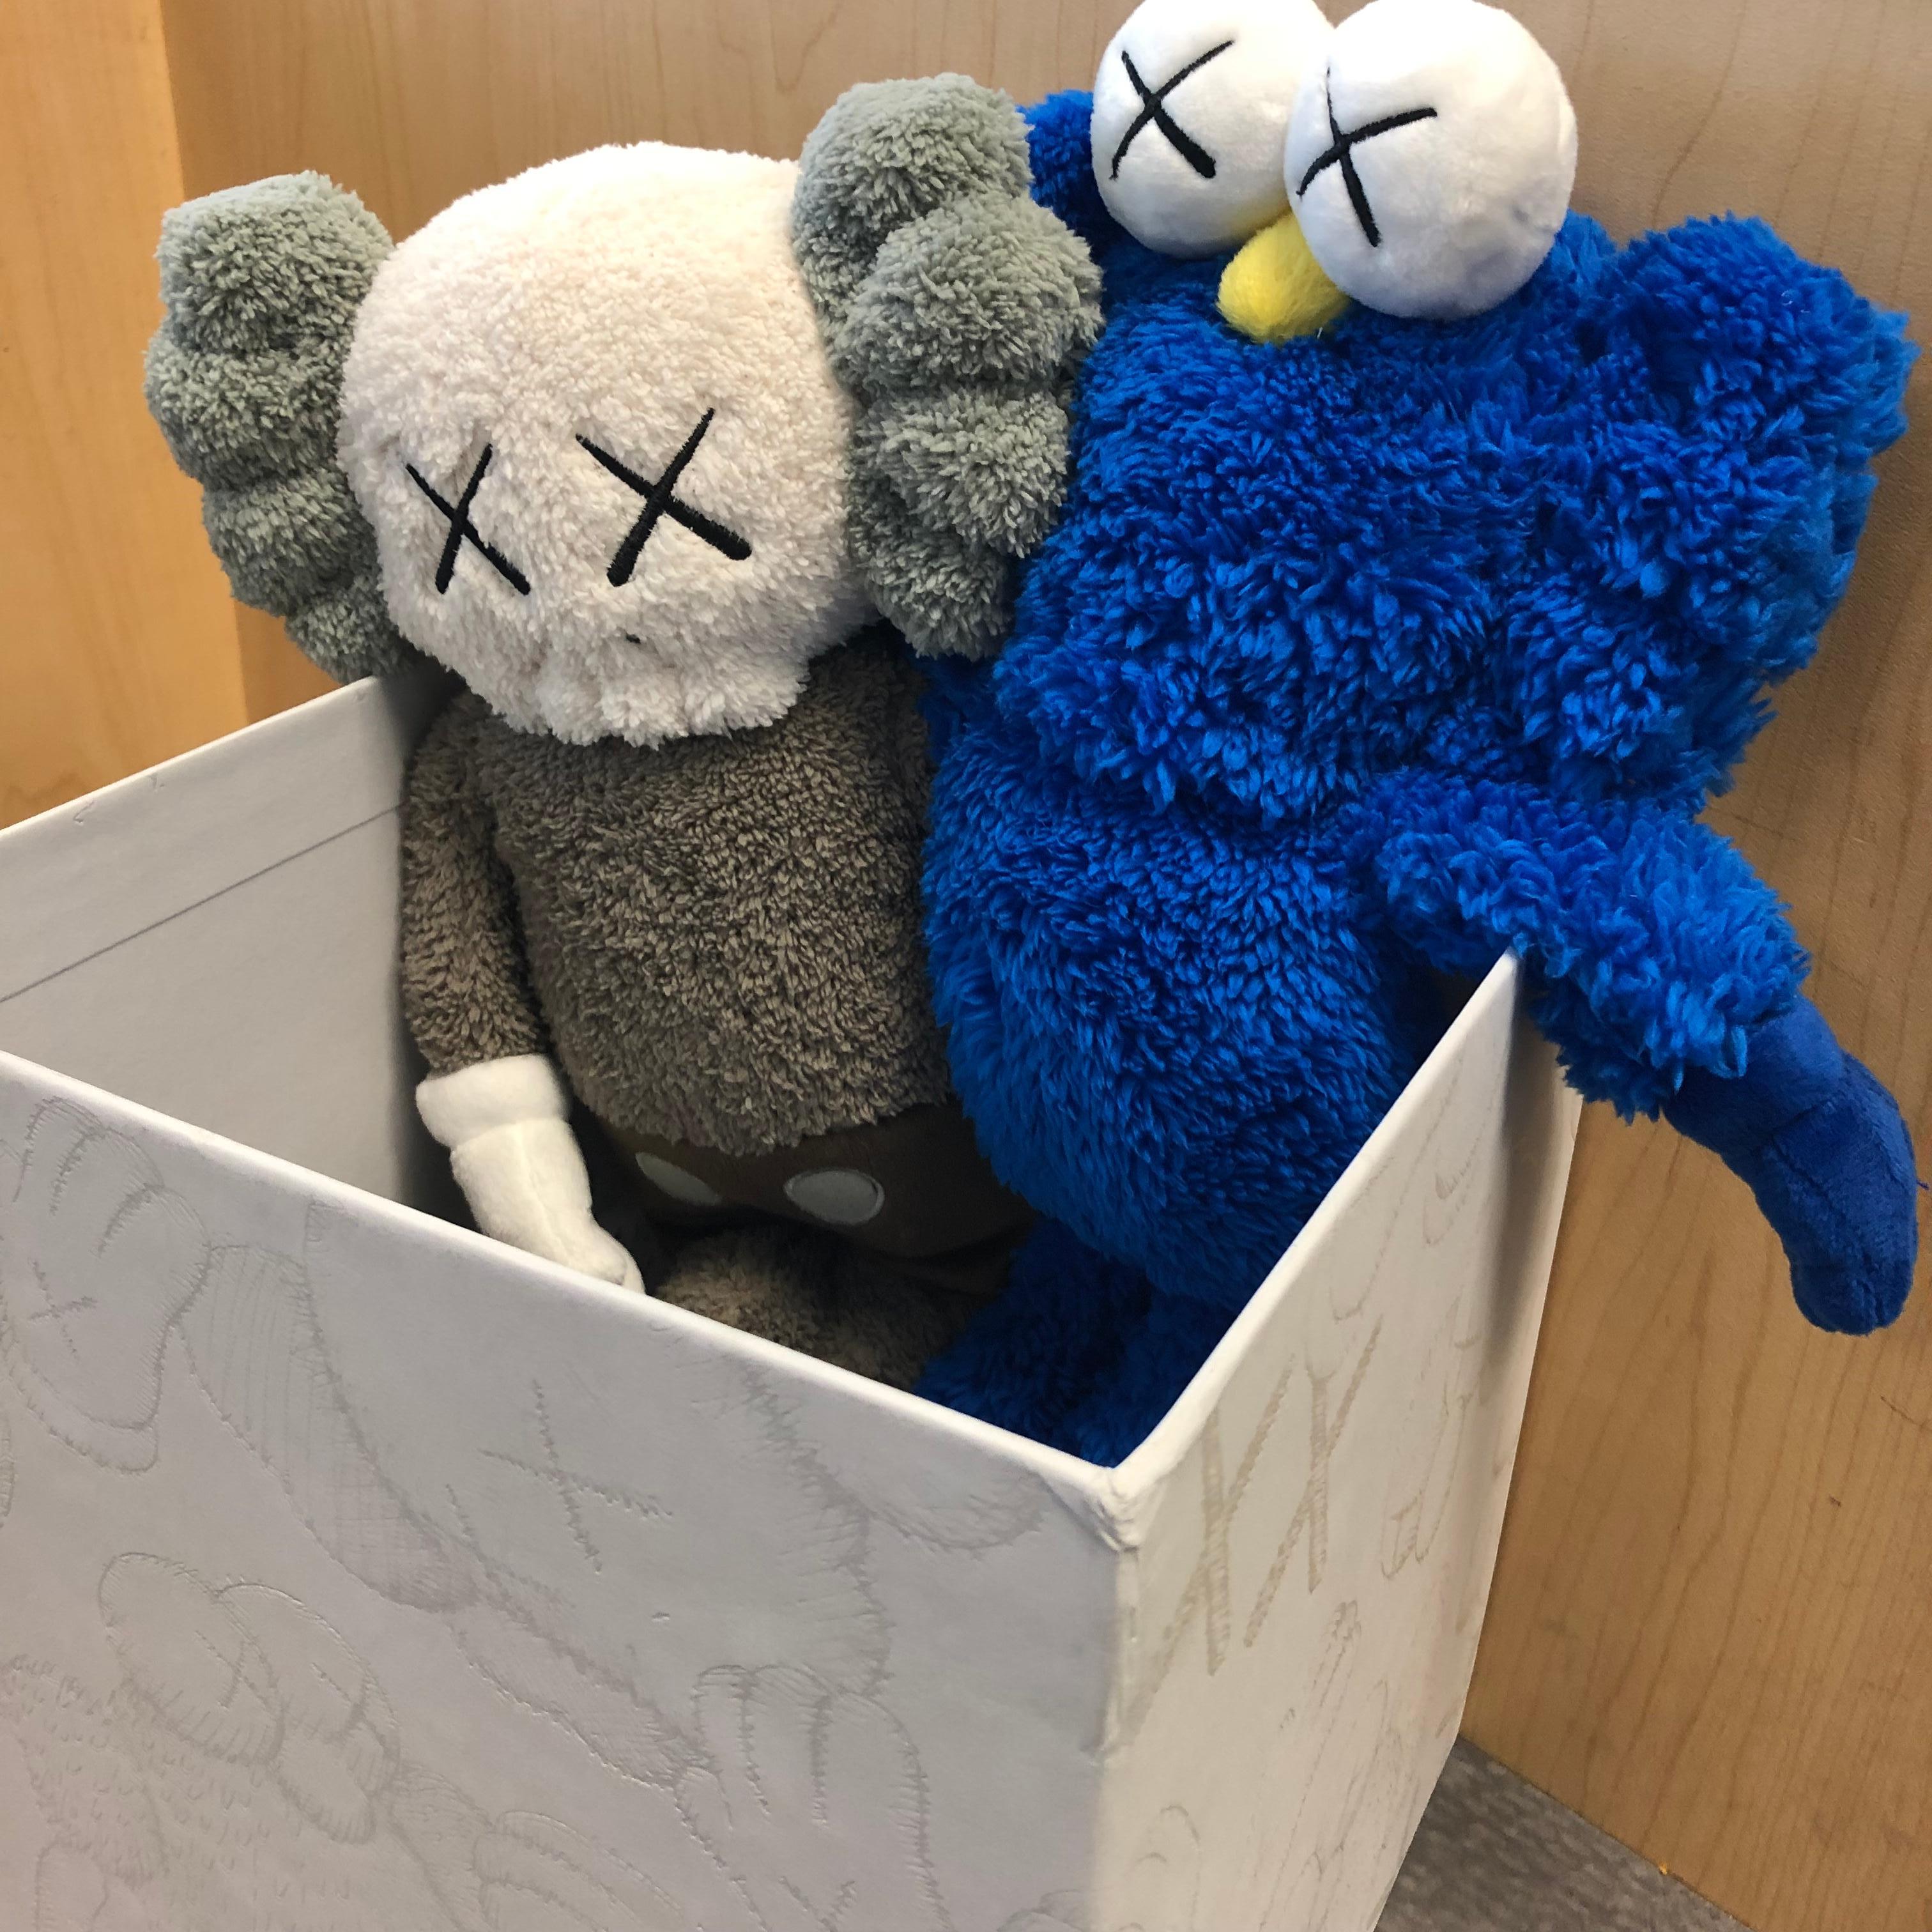 KAWS Seeing/Watching 2018:
Released in conjunction with the installation of the KAWS Seeing/Watching sculpture overlooking the Xiang River & city of Changsha, China (KAWS' first permanent installation in China). These cheery KAWS plush figures